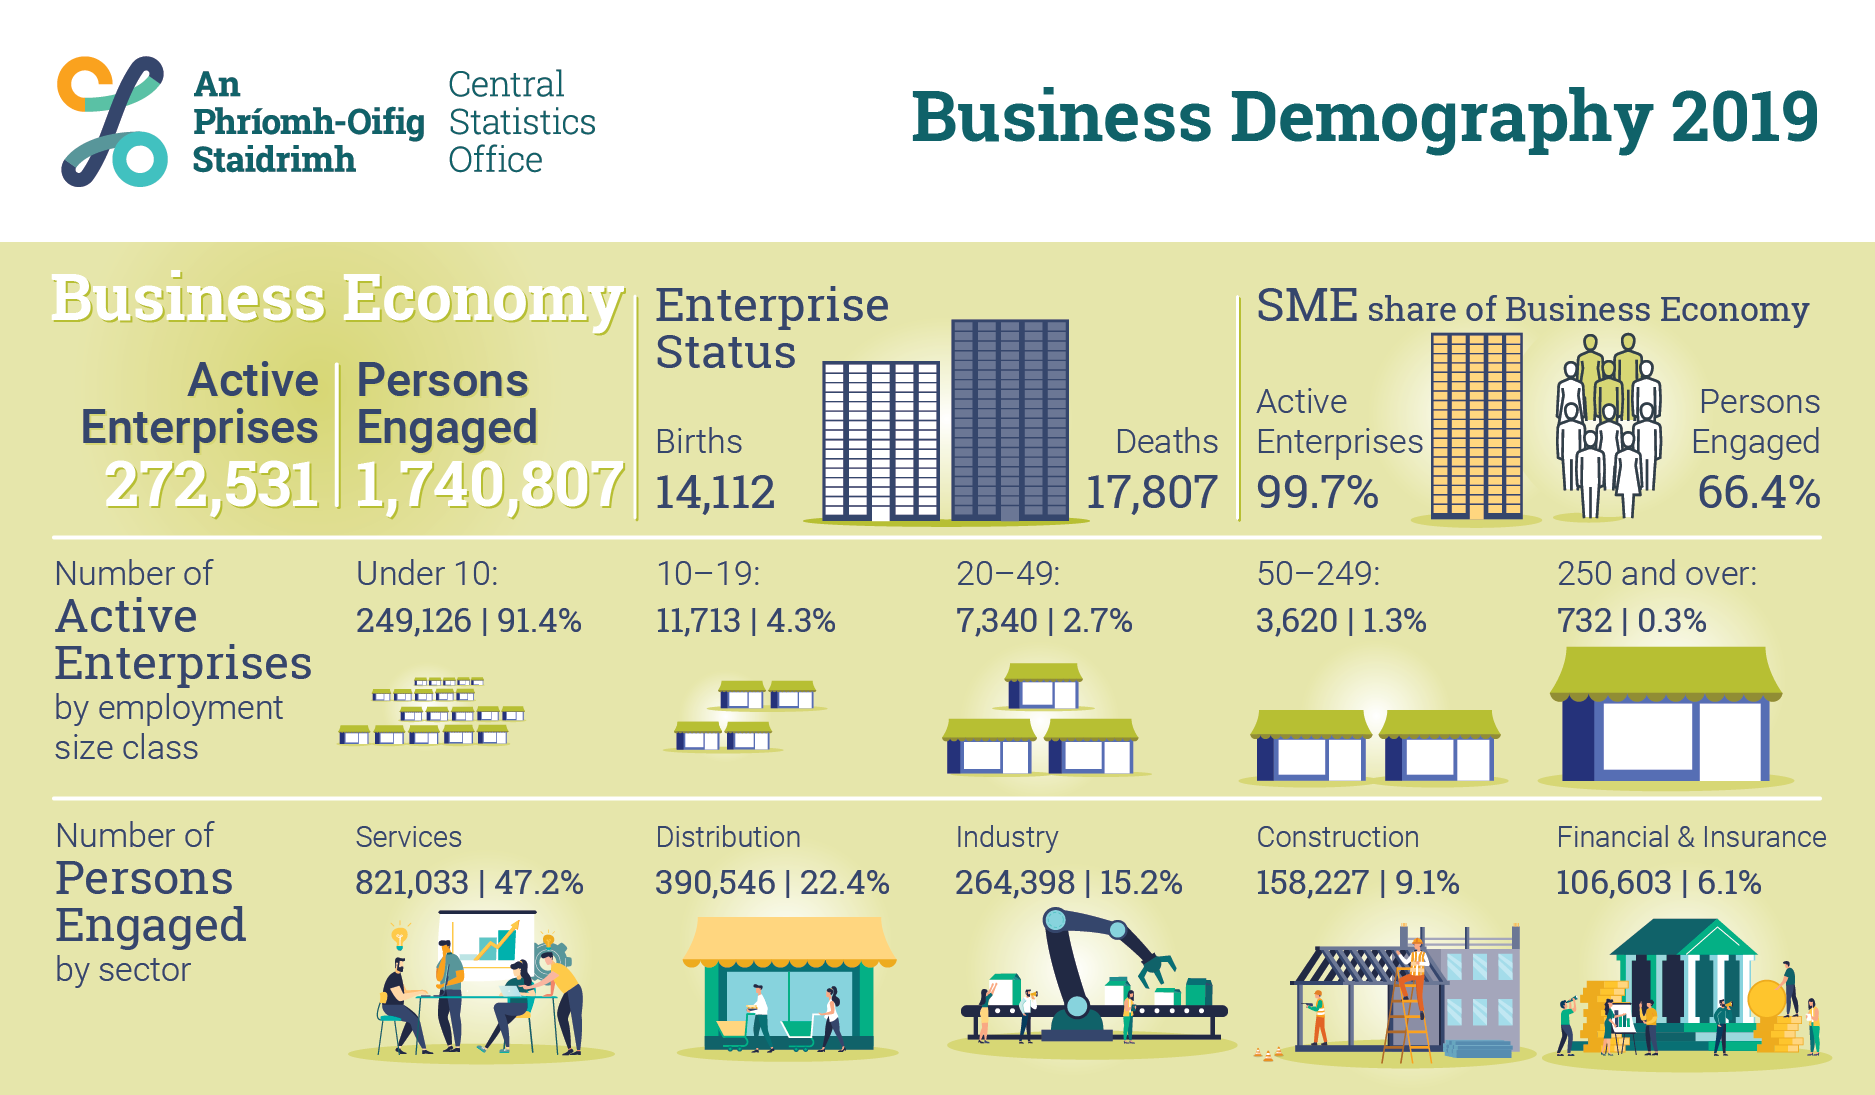 Business Demography 2019 Infographic image